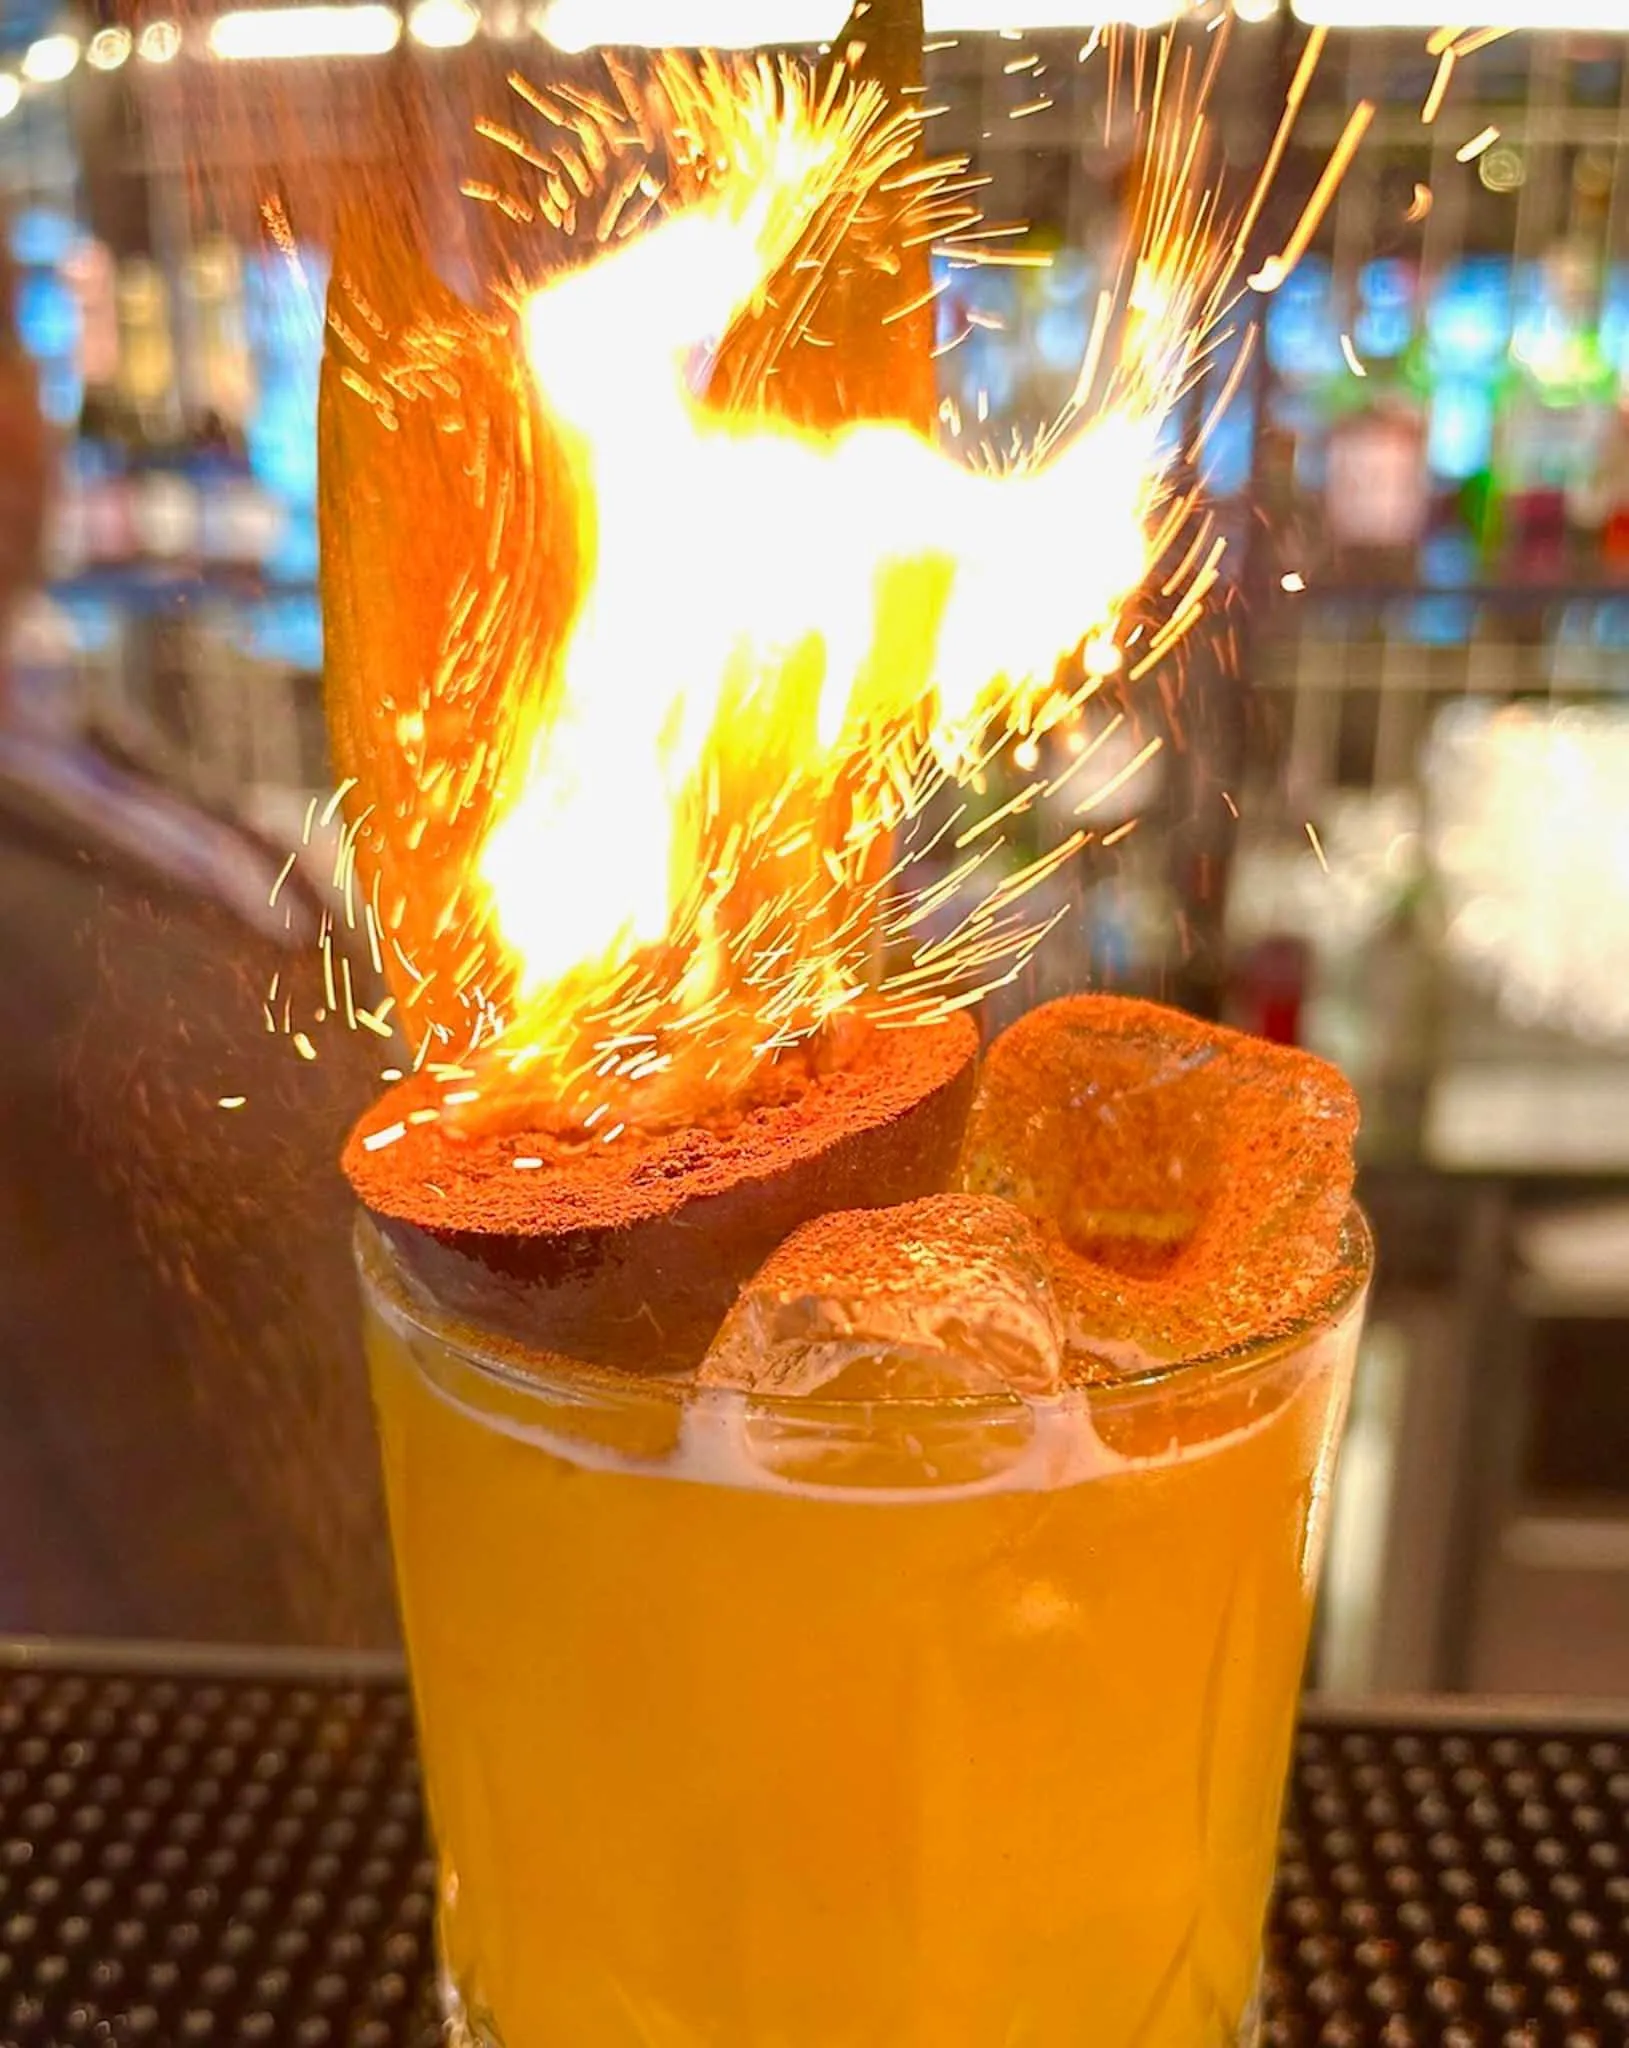 A glass of orange juice with a flame in it.